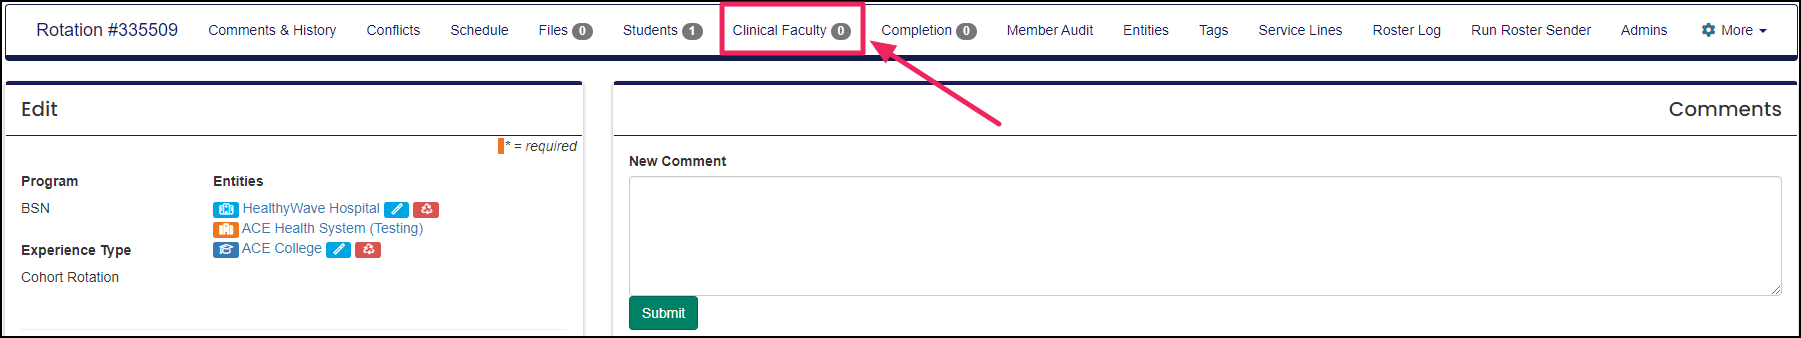 Image shows rotation edit page with an arrow pointing to faculty tab.